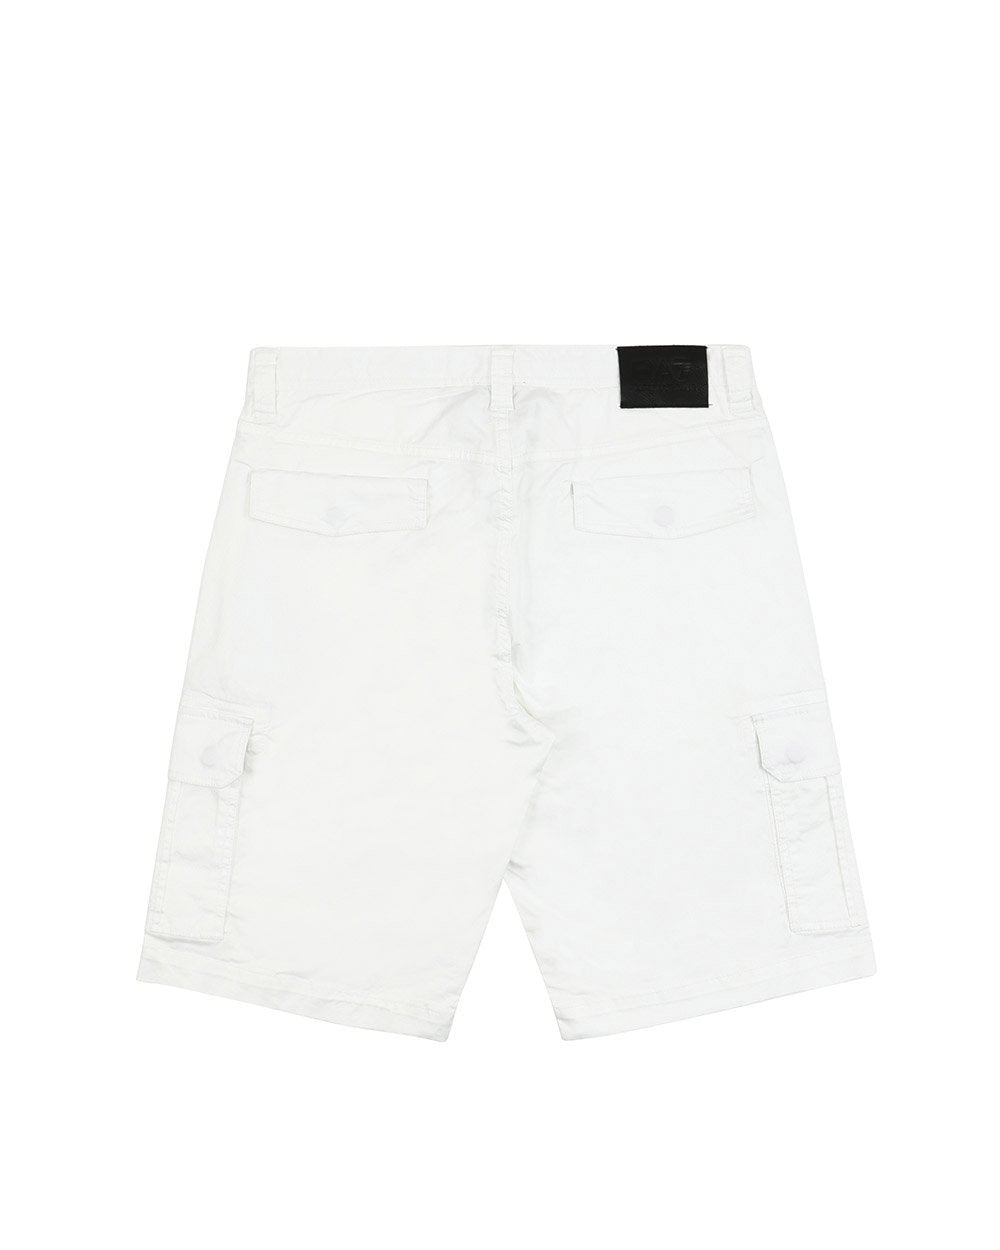 Cotton Shorts - ISSI Outlet